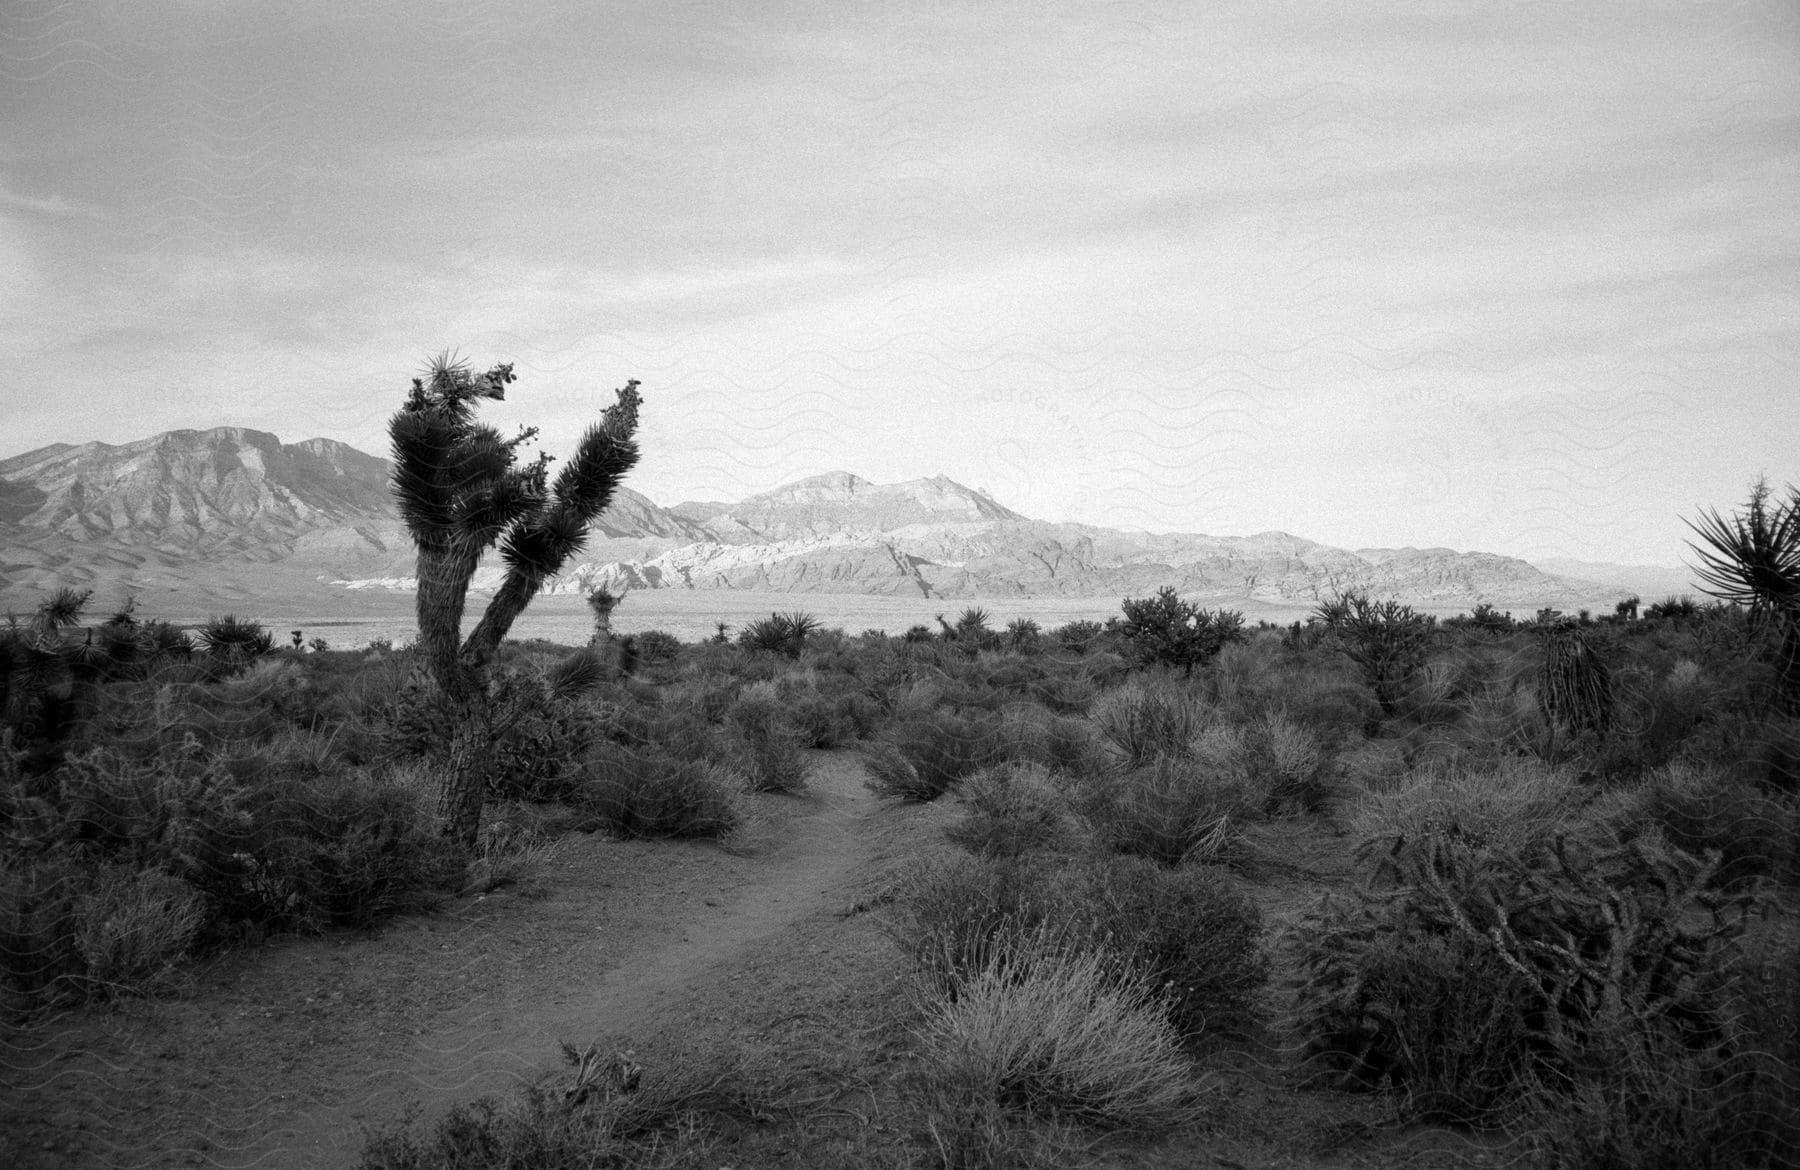 A black and white desert landscape with mountains in the background a cloudy sky tumbleweeds bushes and a dirt path in red rock canyon las vegas nv